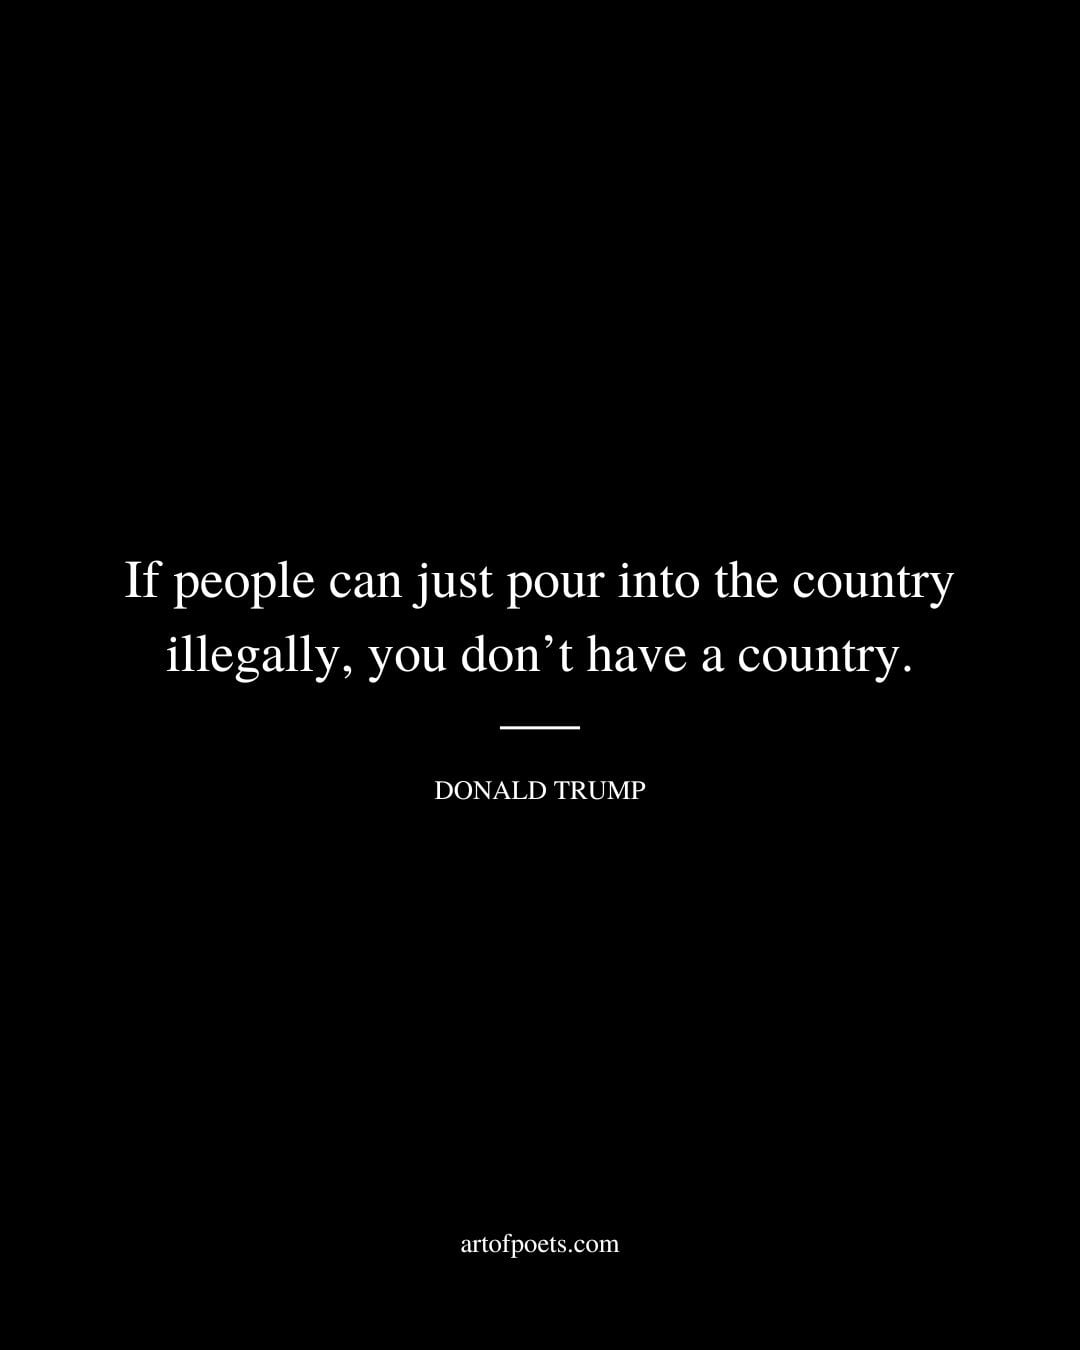 If people can just pour into the country illegally you dont have a country